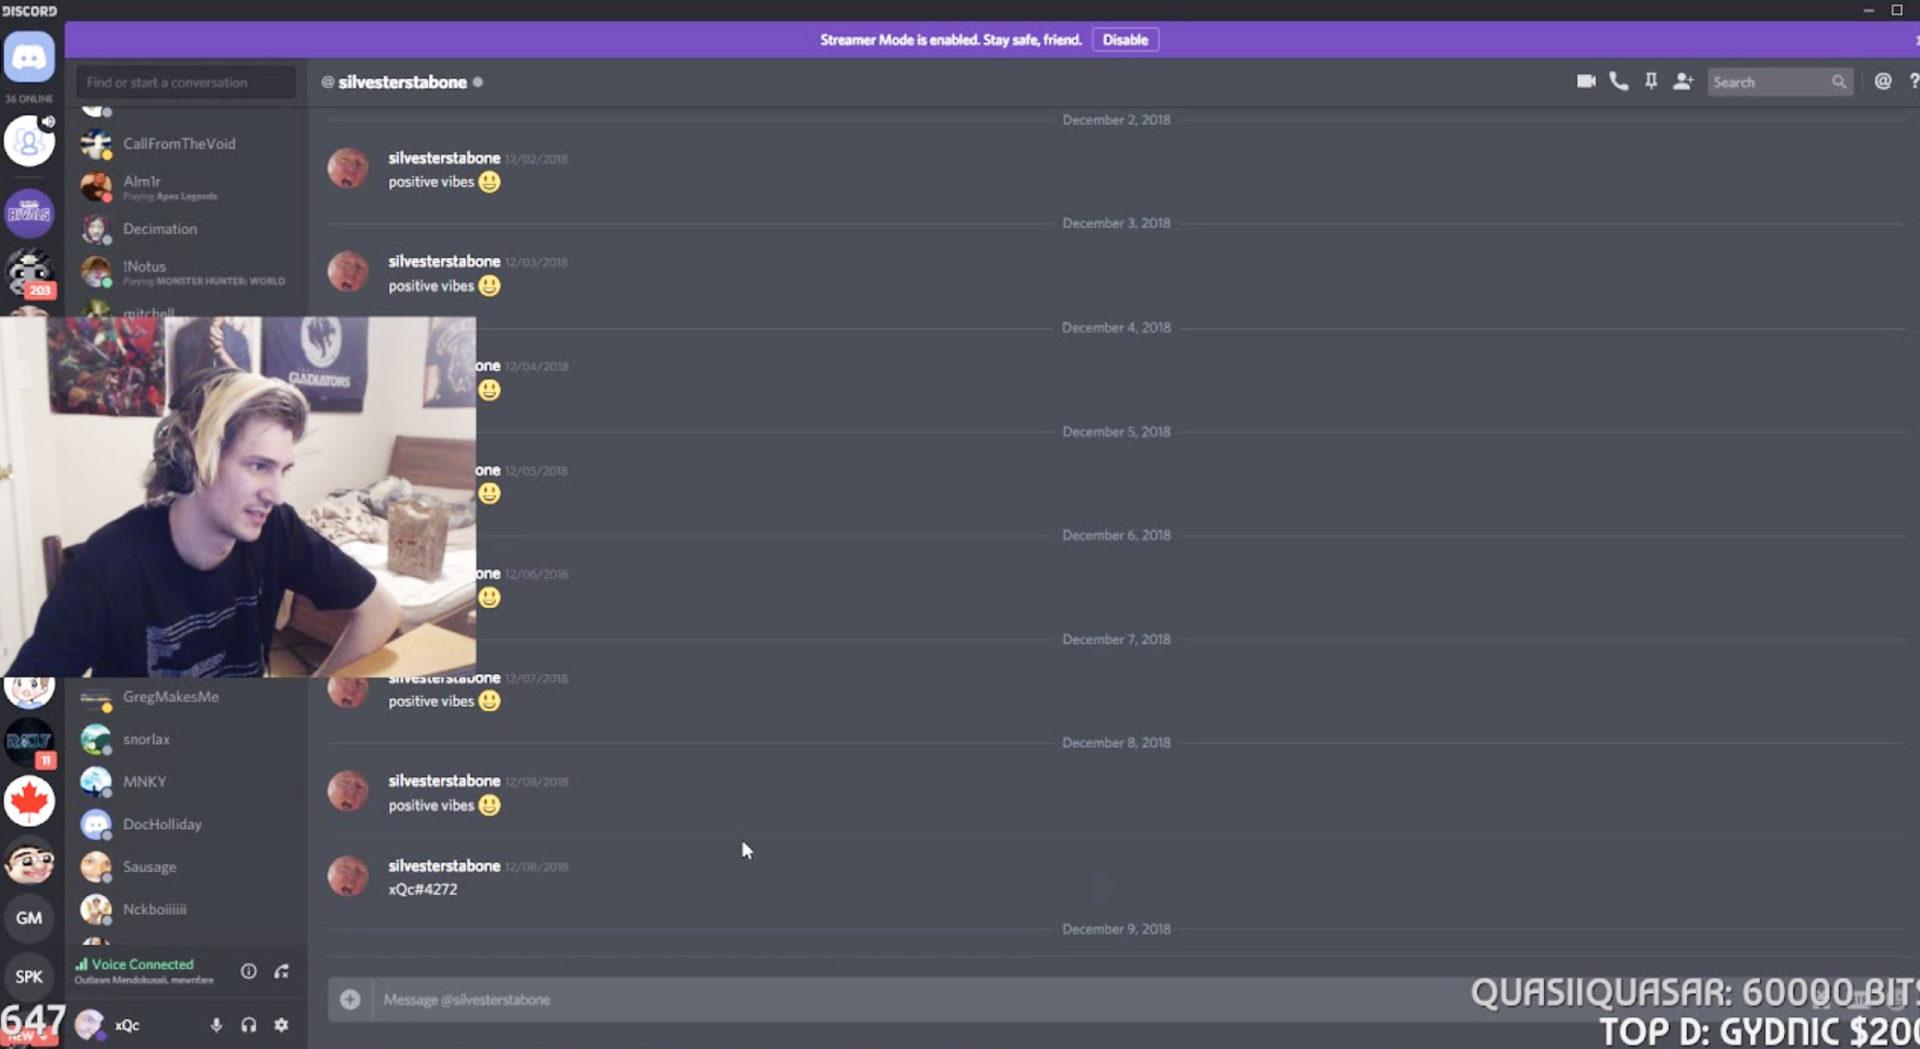 xqc discord messages